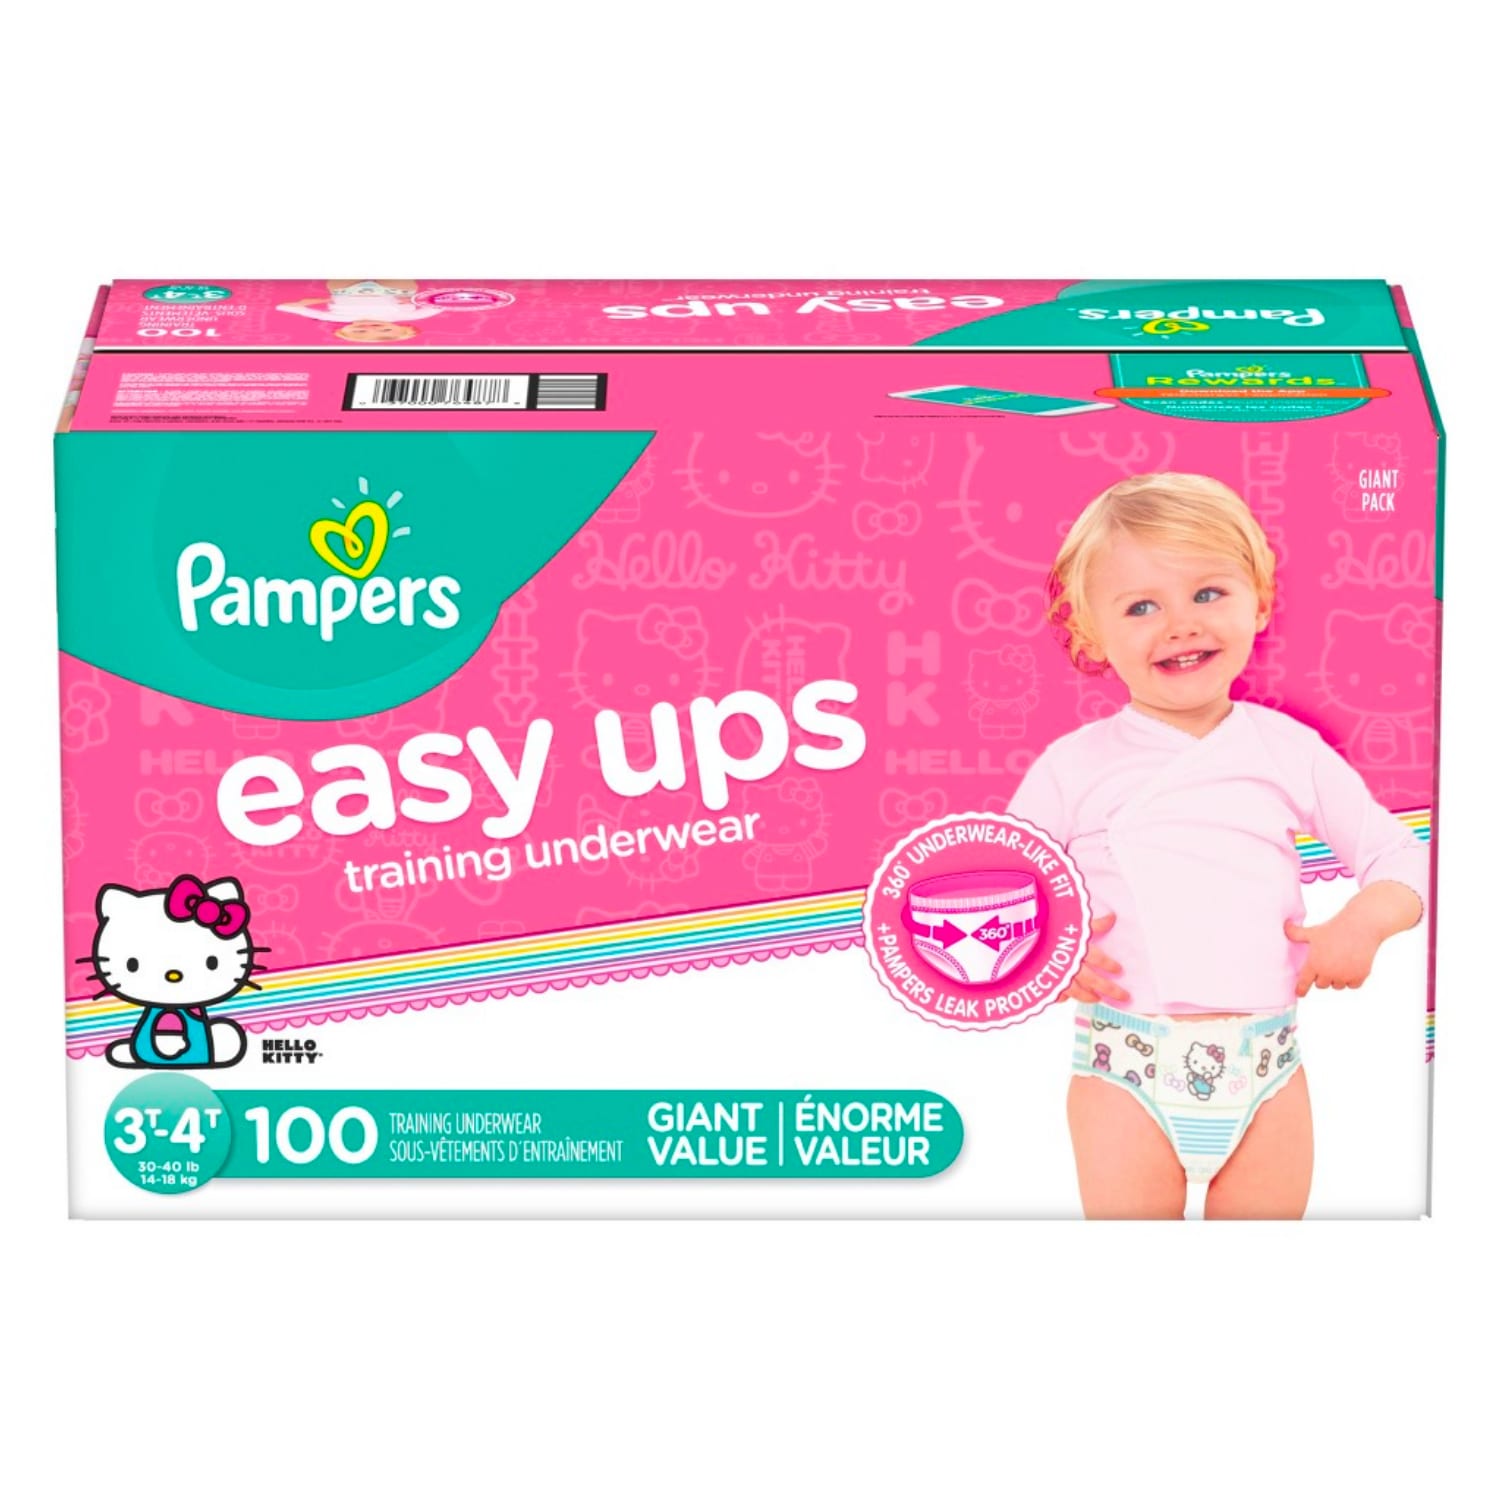 https://medaki.mo.cloudinary.net/static/products/pampers-easy-ups-training-pants-for-girls-giant-pack-size-3t-4t-104-count.webp